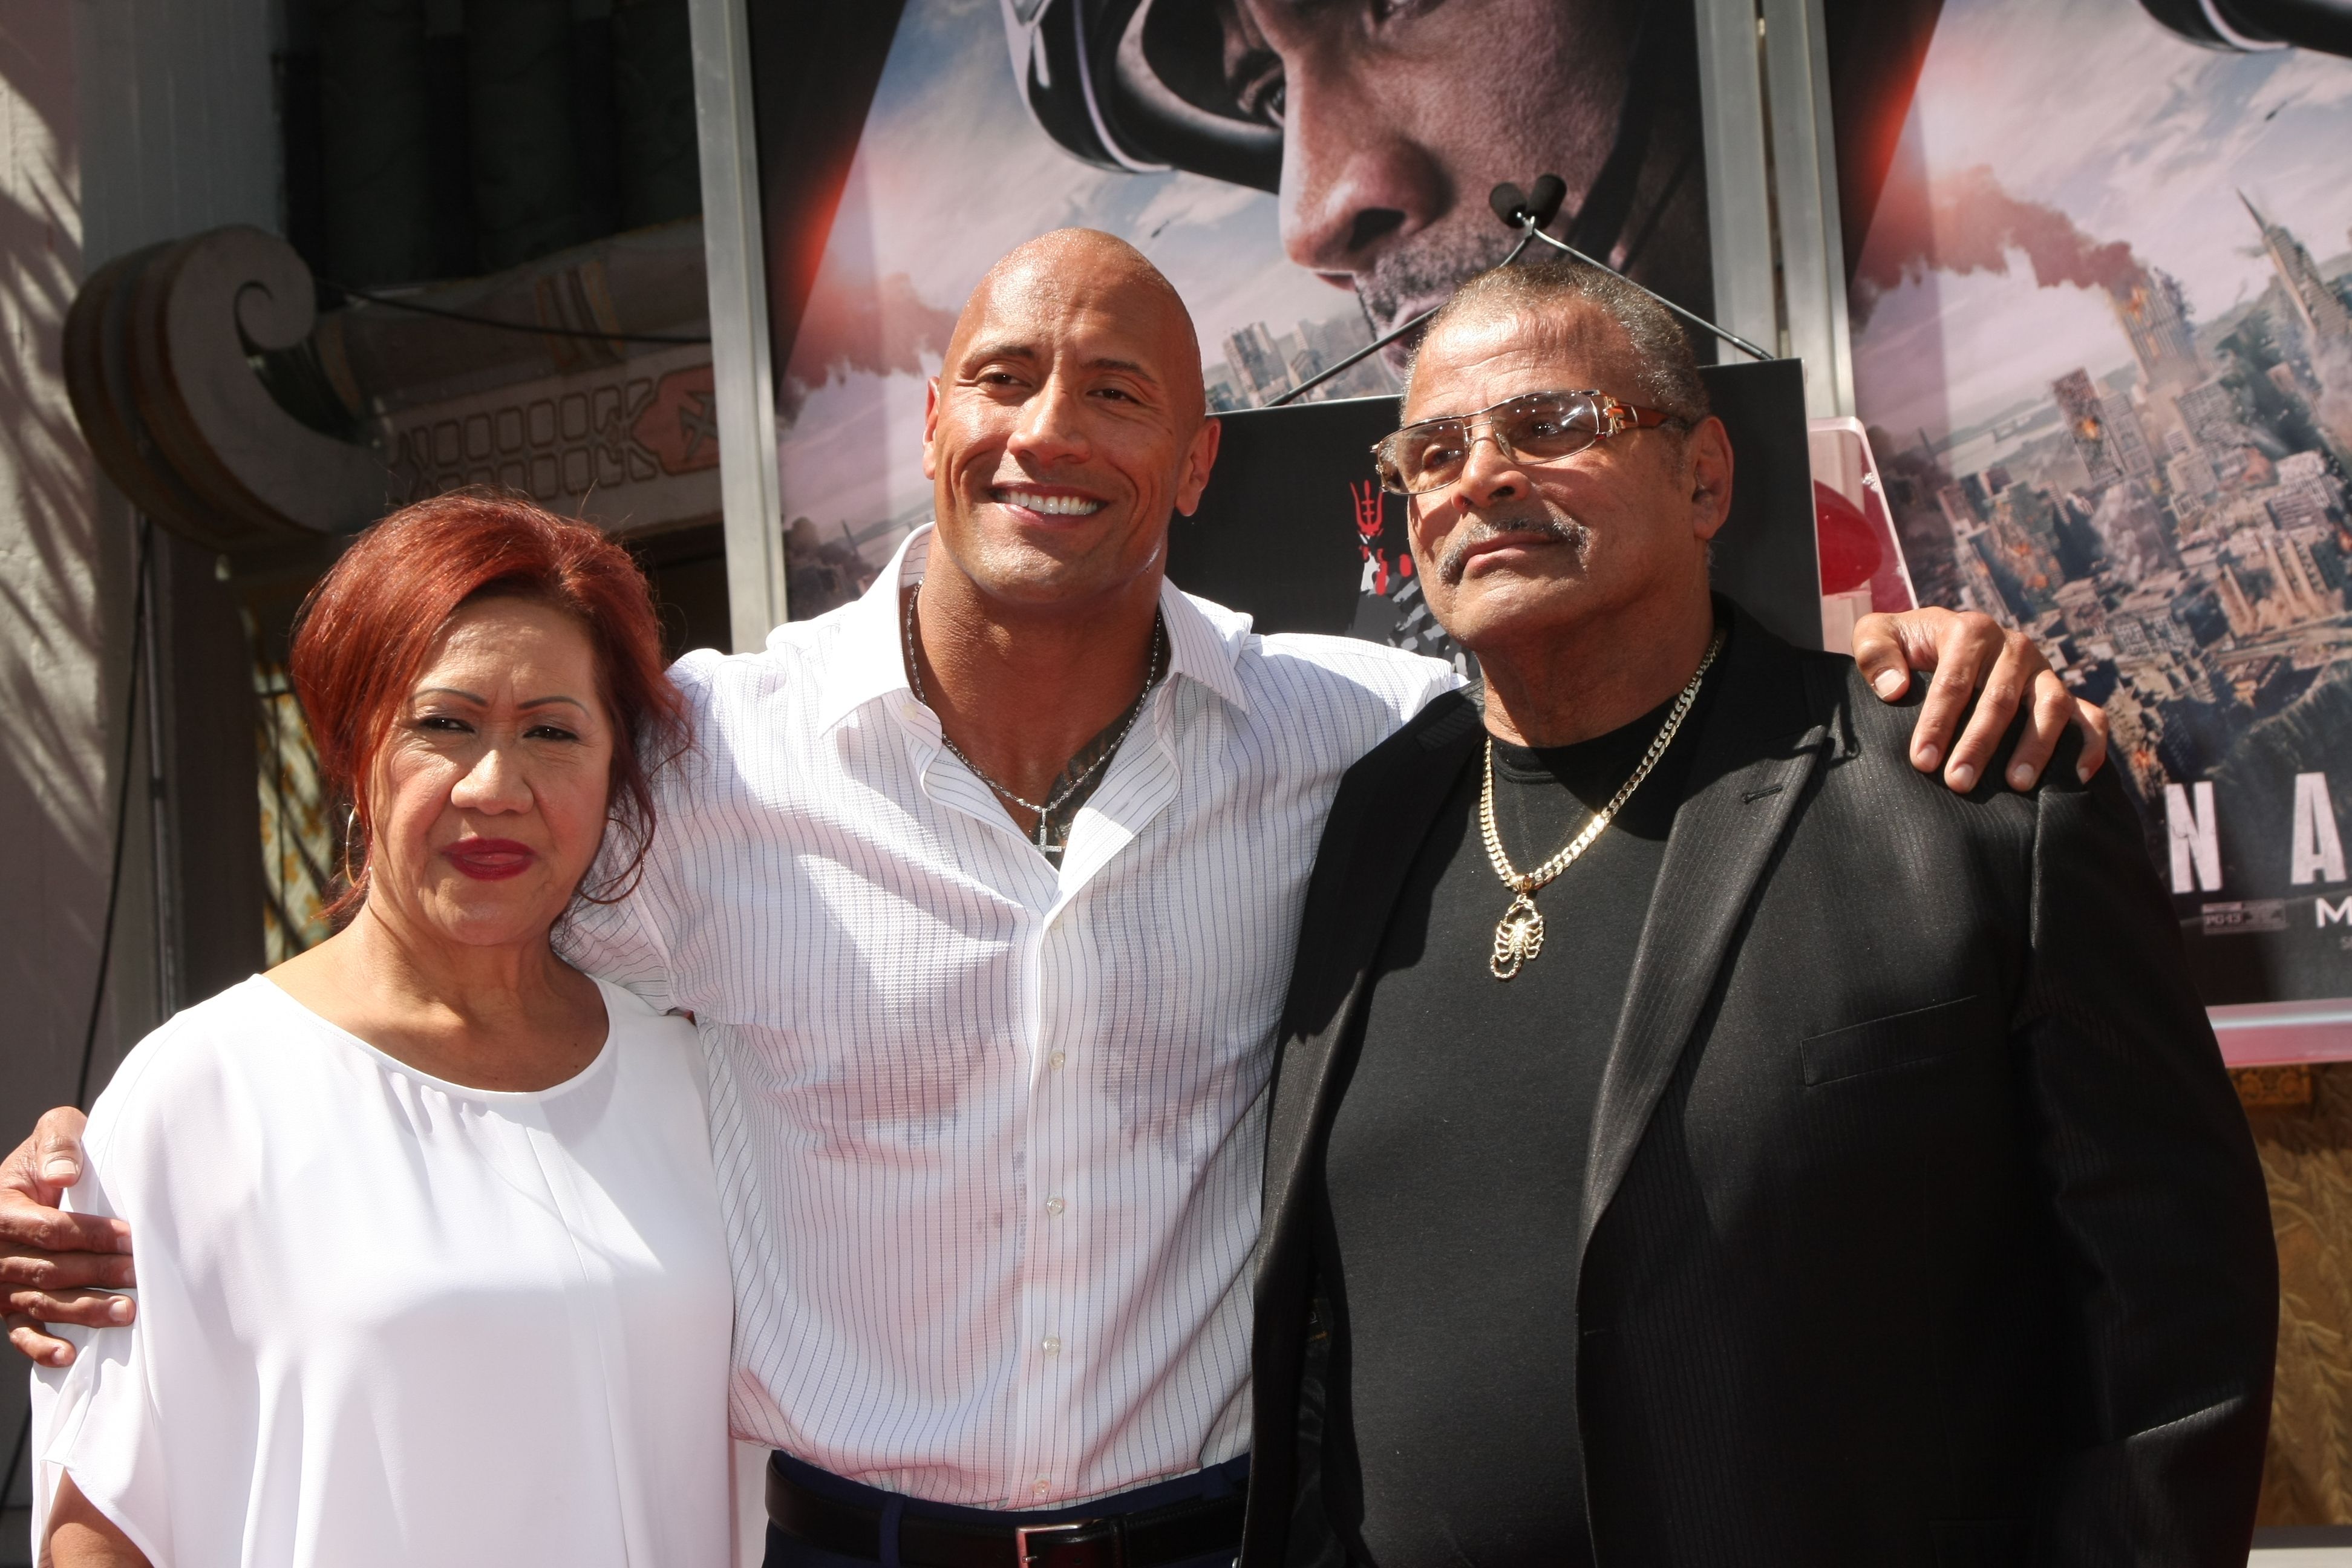 Dwayne "The Rock" Johnson at a movie premiere with his parents | Source: Getty Images